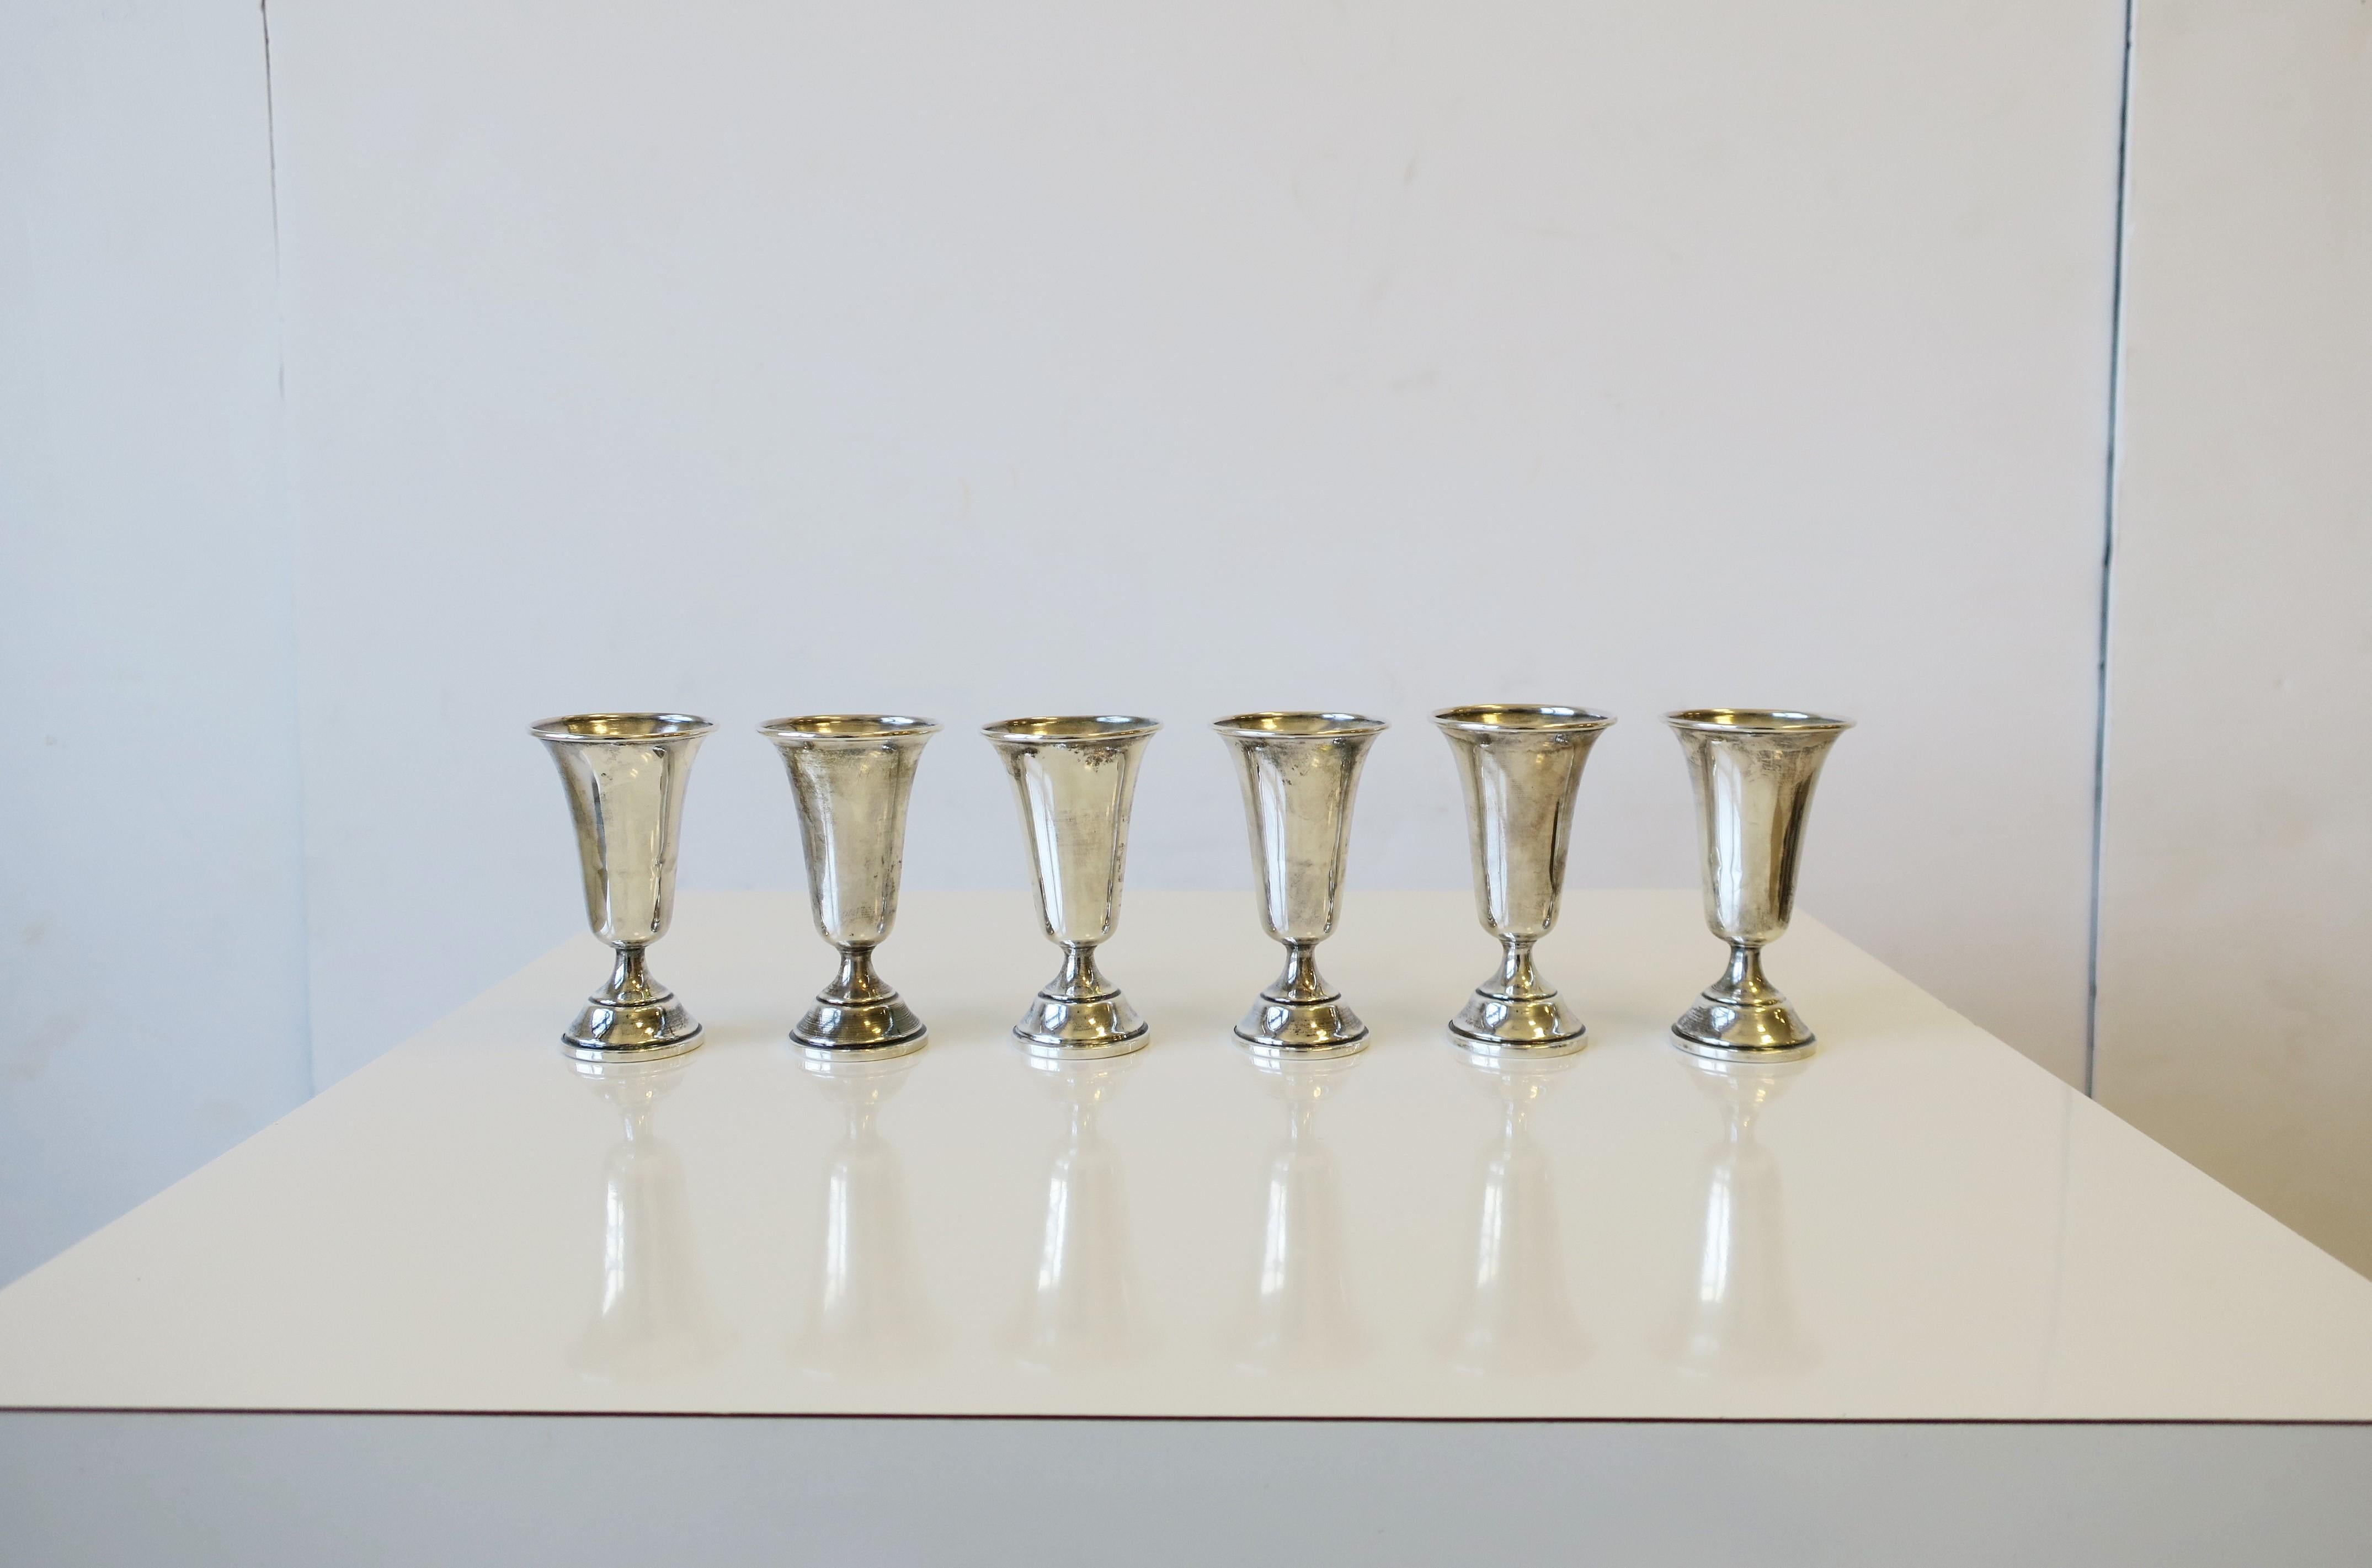 An antique set of six (6) sterling silver aperitif cordial liquor/spirit cups or vodka shot glasses, circa early-20th century. Sterling silver chills very well so great for vodka shots or other liquor. Set with original fitted box. Marked 